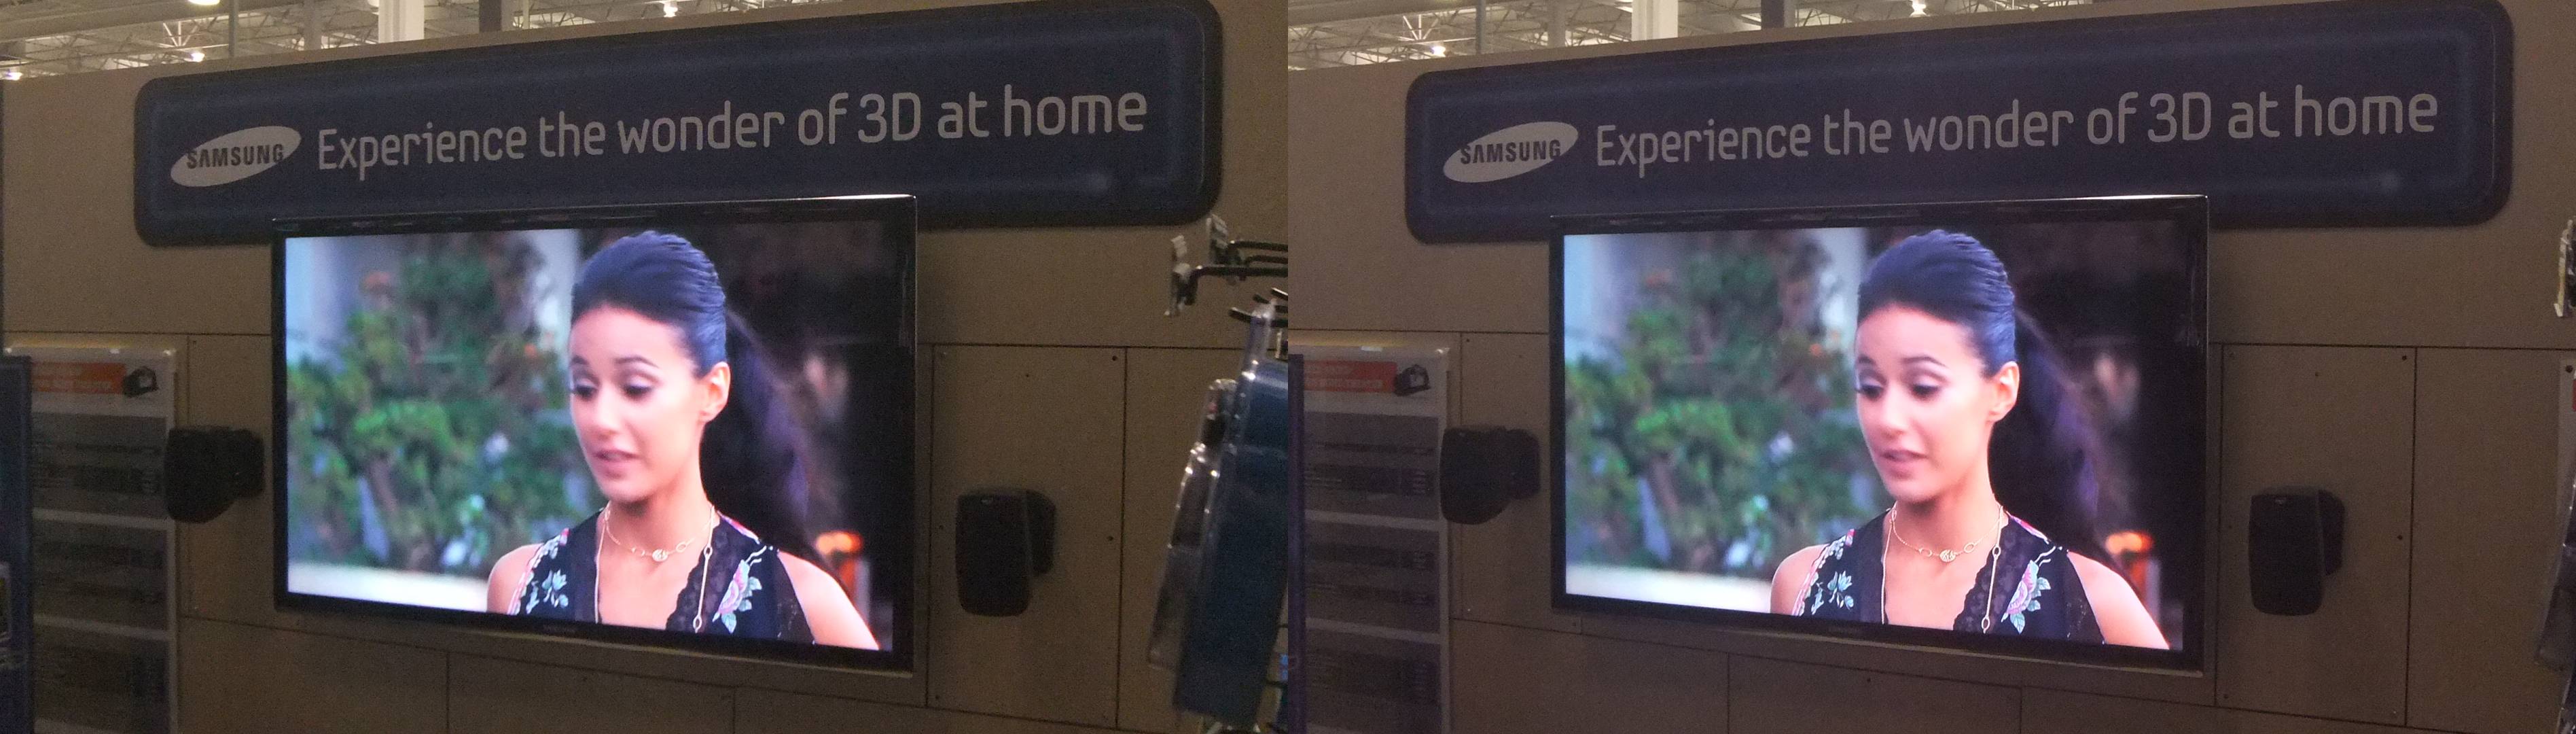 Samsung 3D HDTV at Best Buy (not with reversed content)